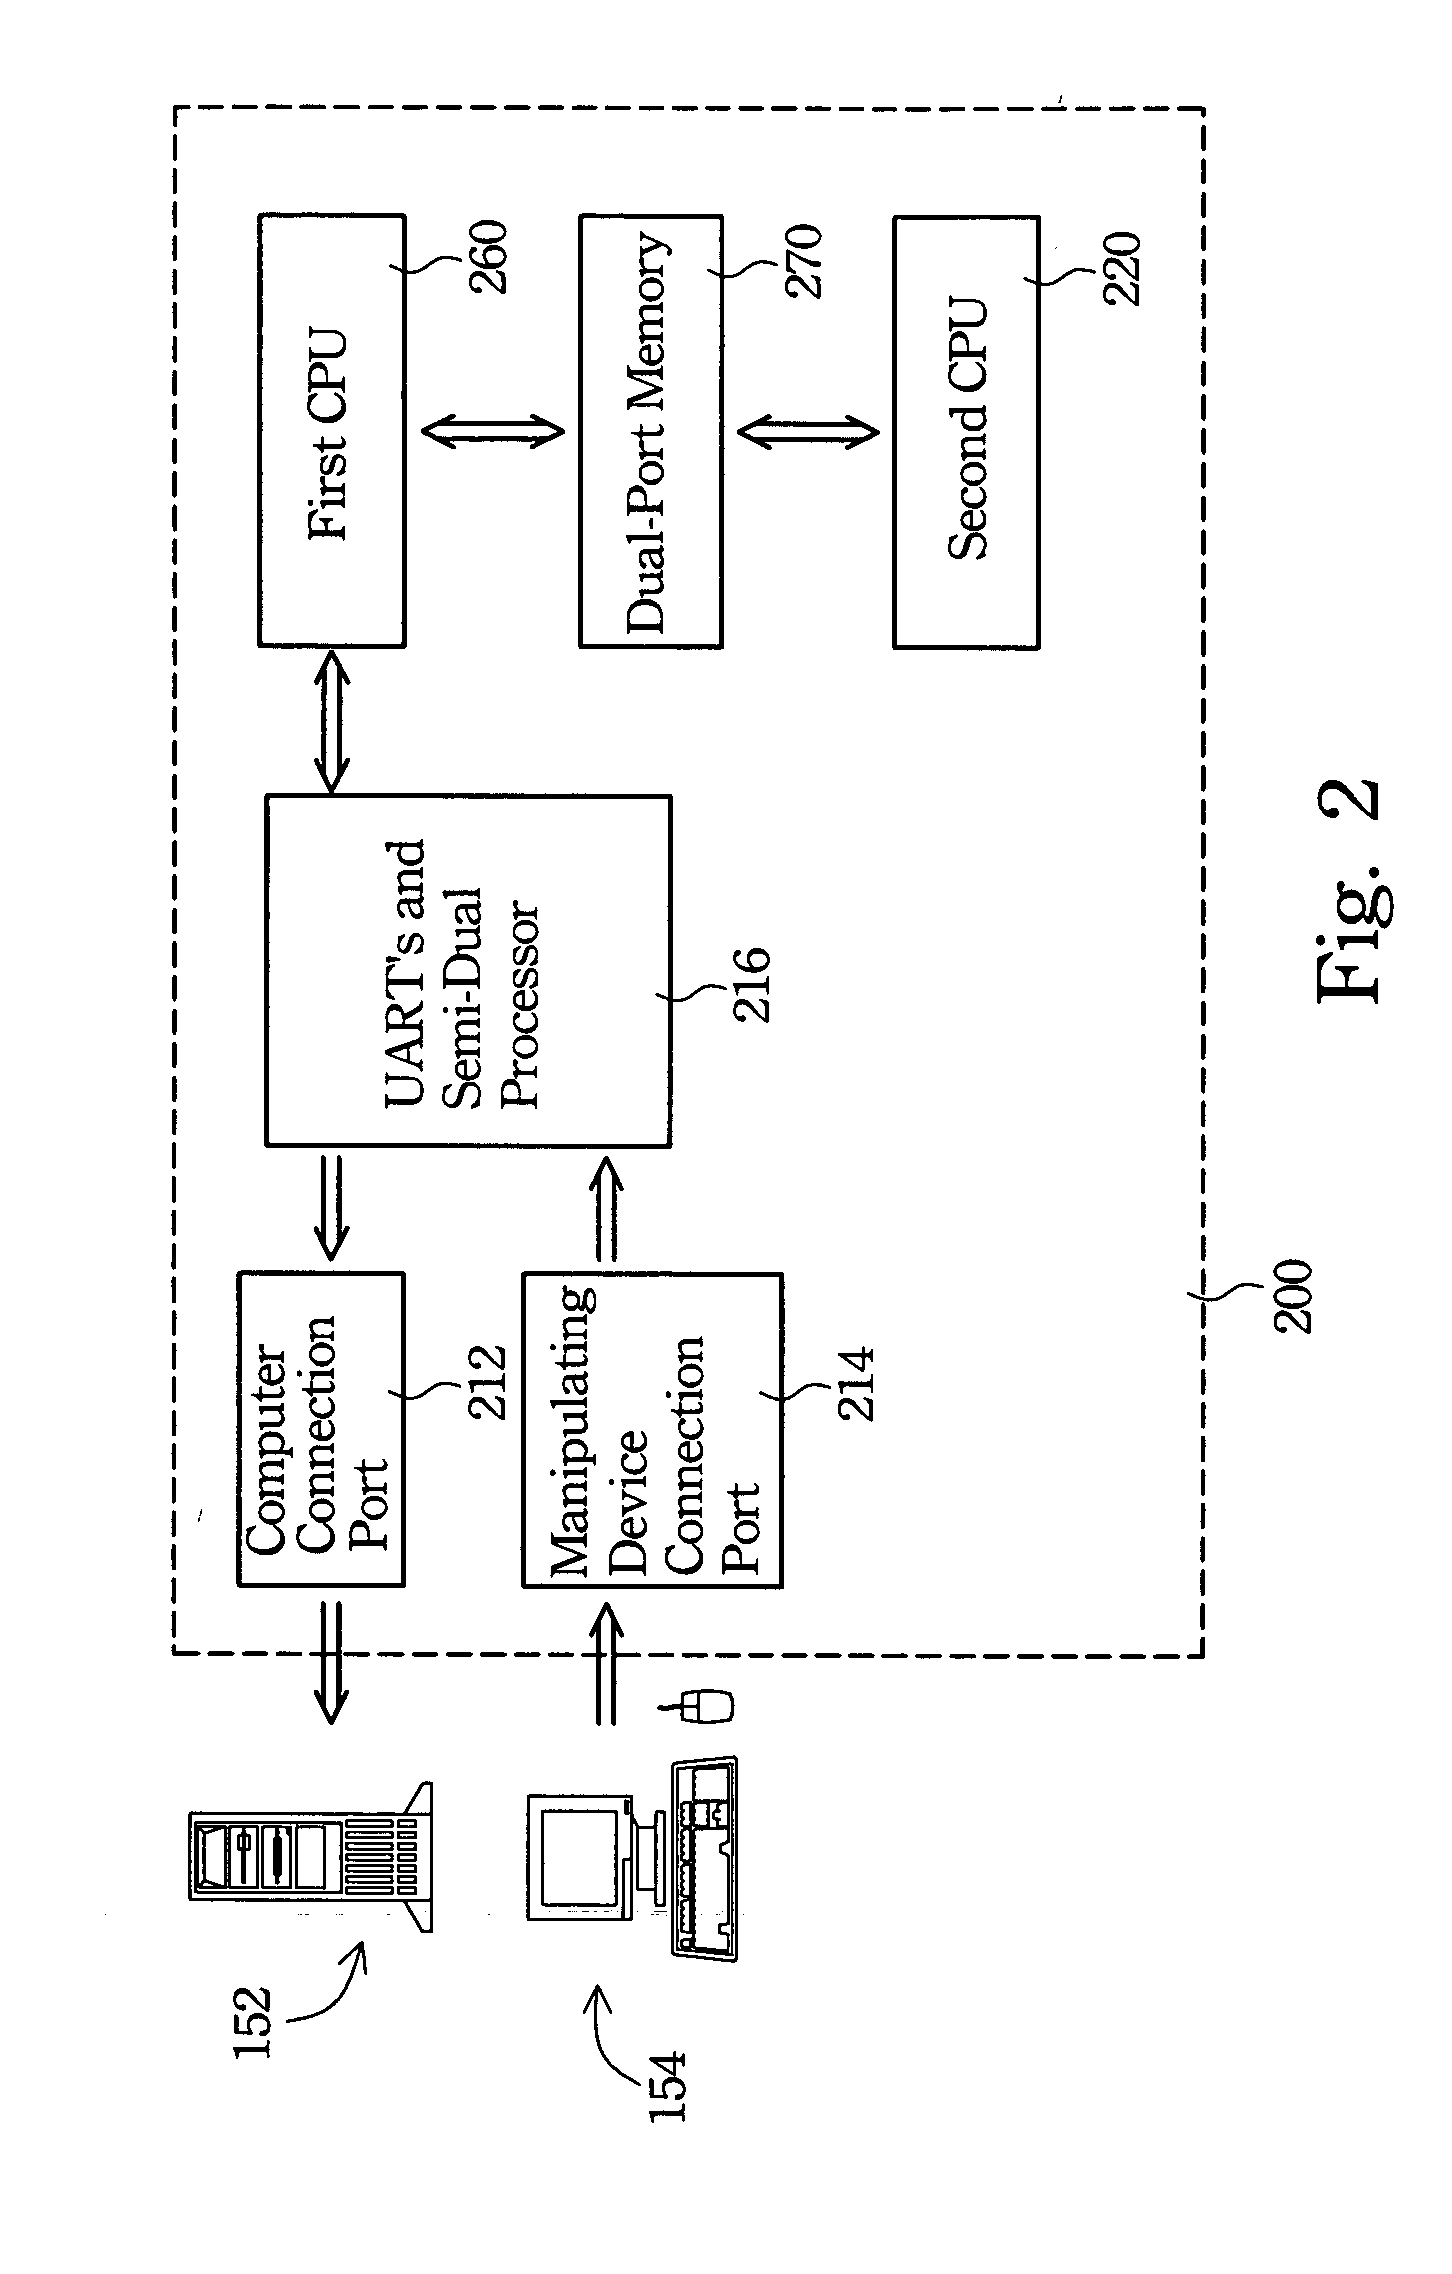 Keyboard video mouse switch and the method thereof